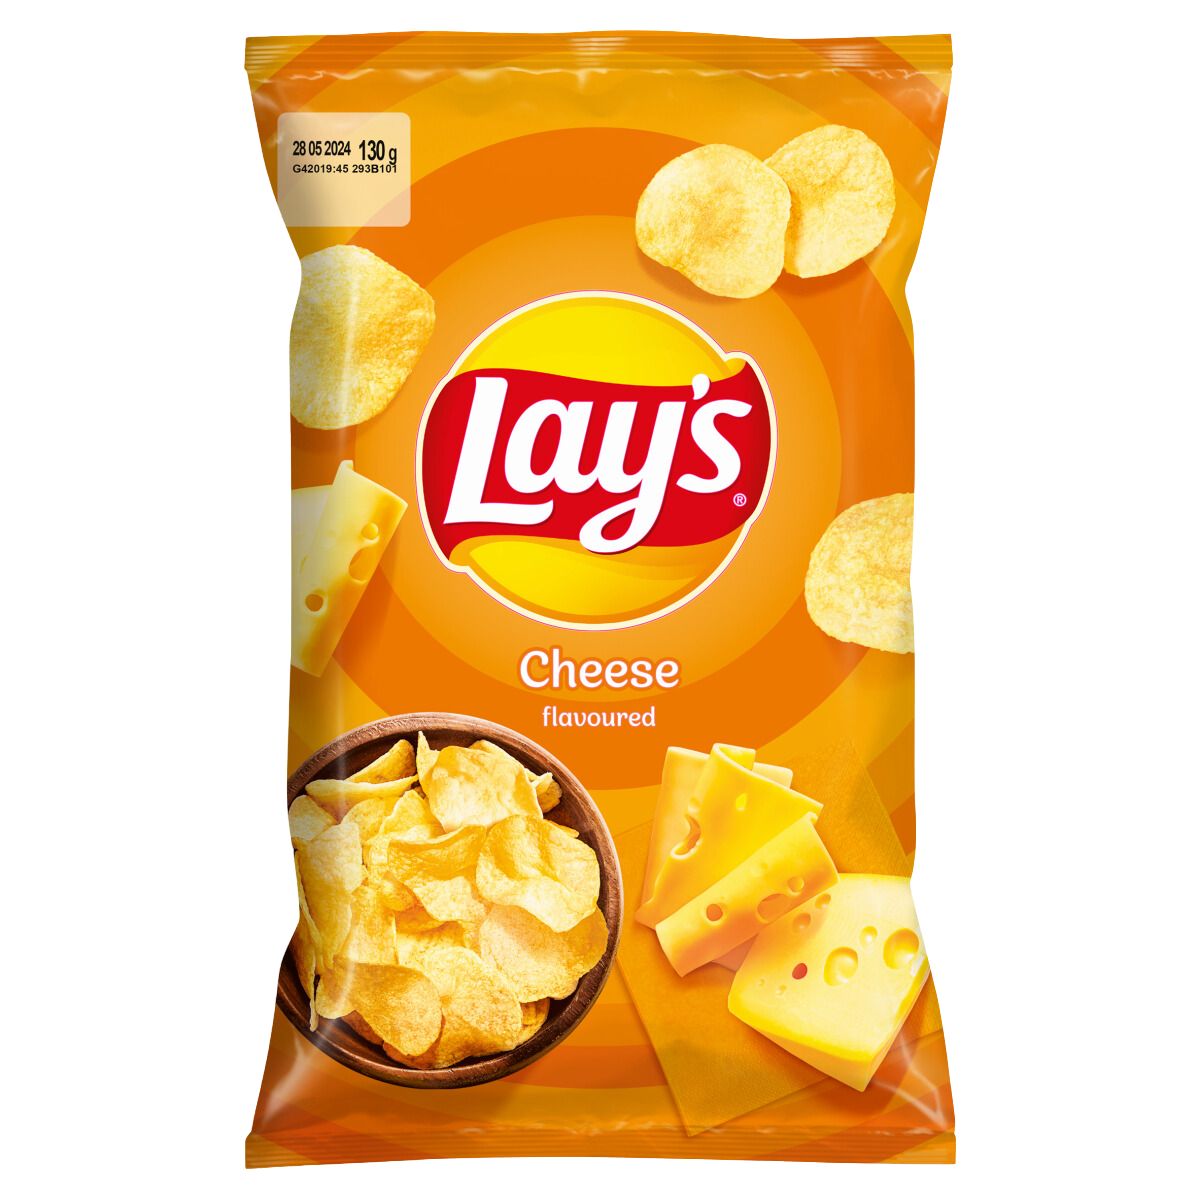 Lays - Cheese Crisps - 130g on a white background.